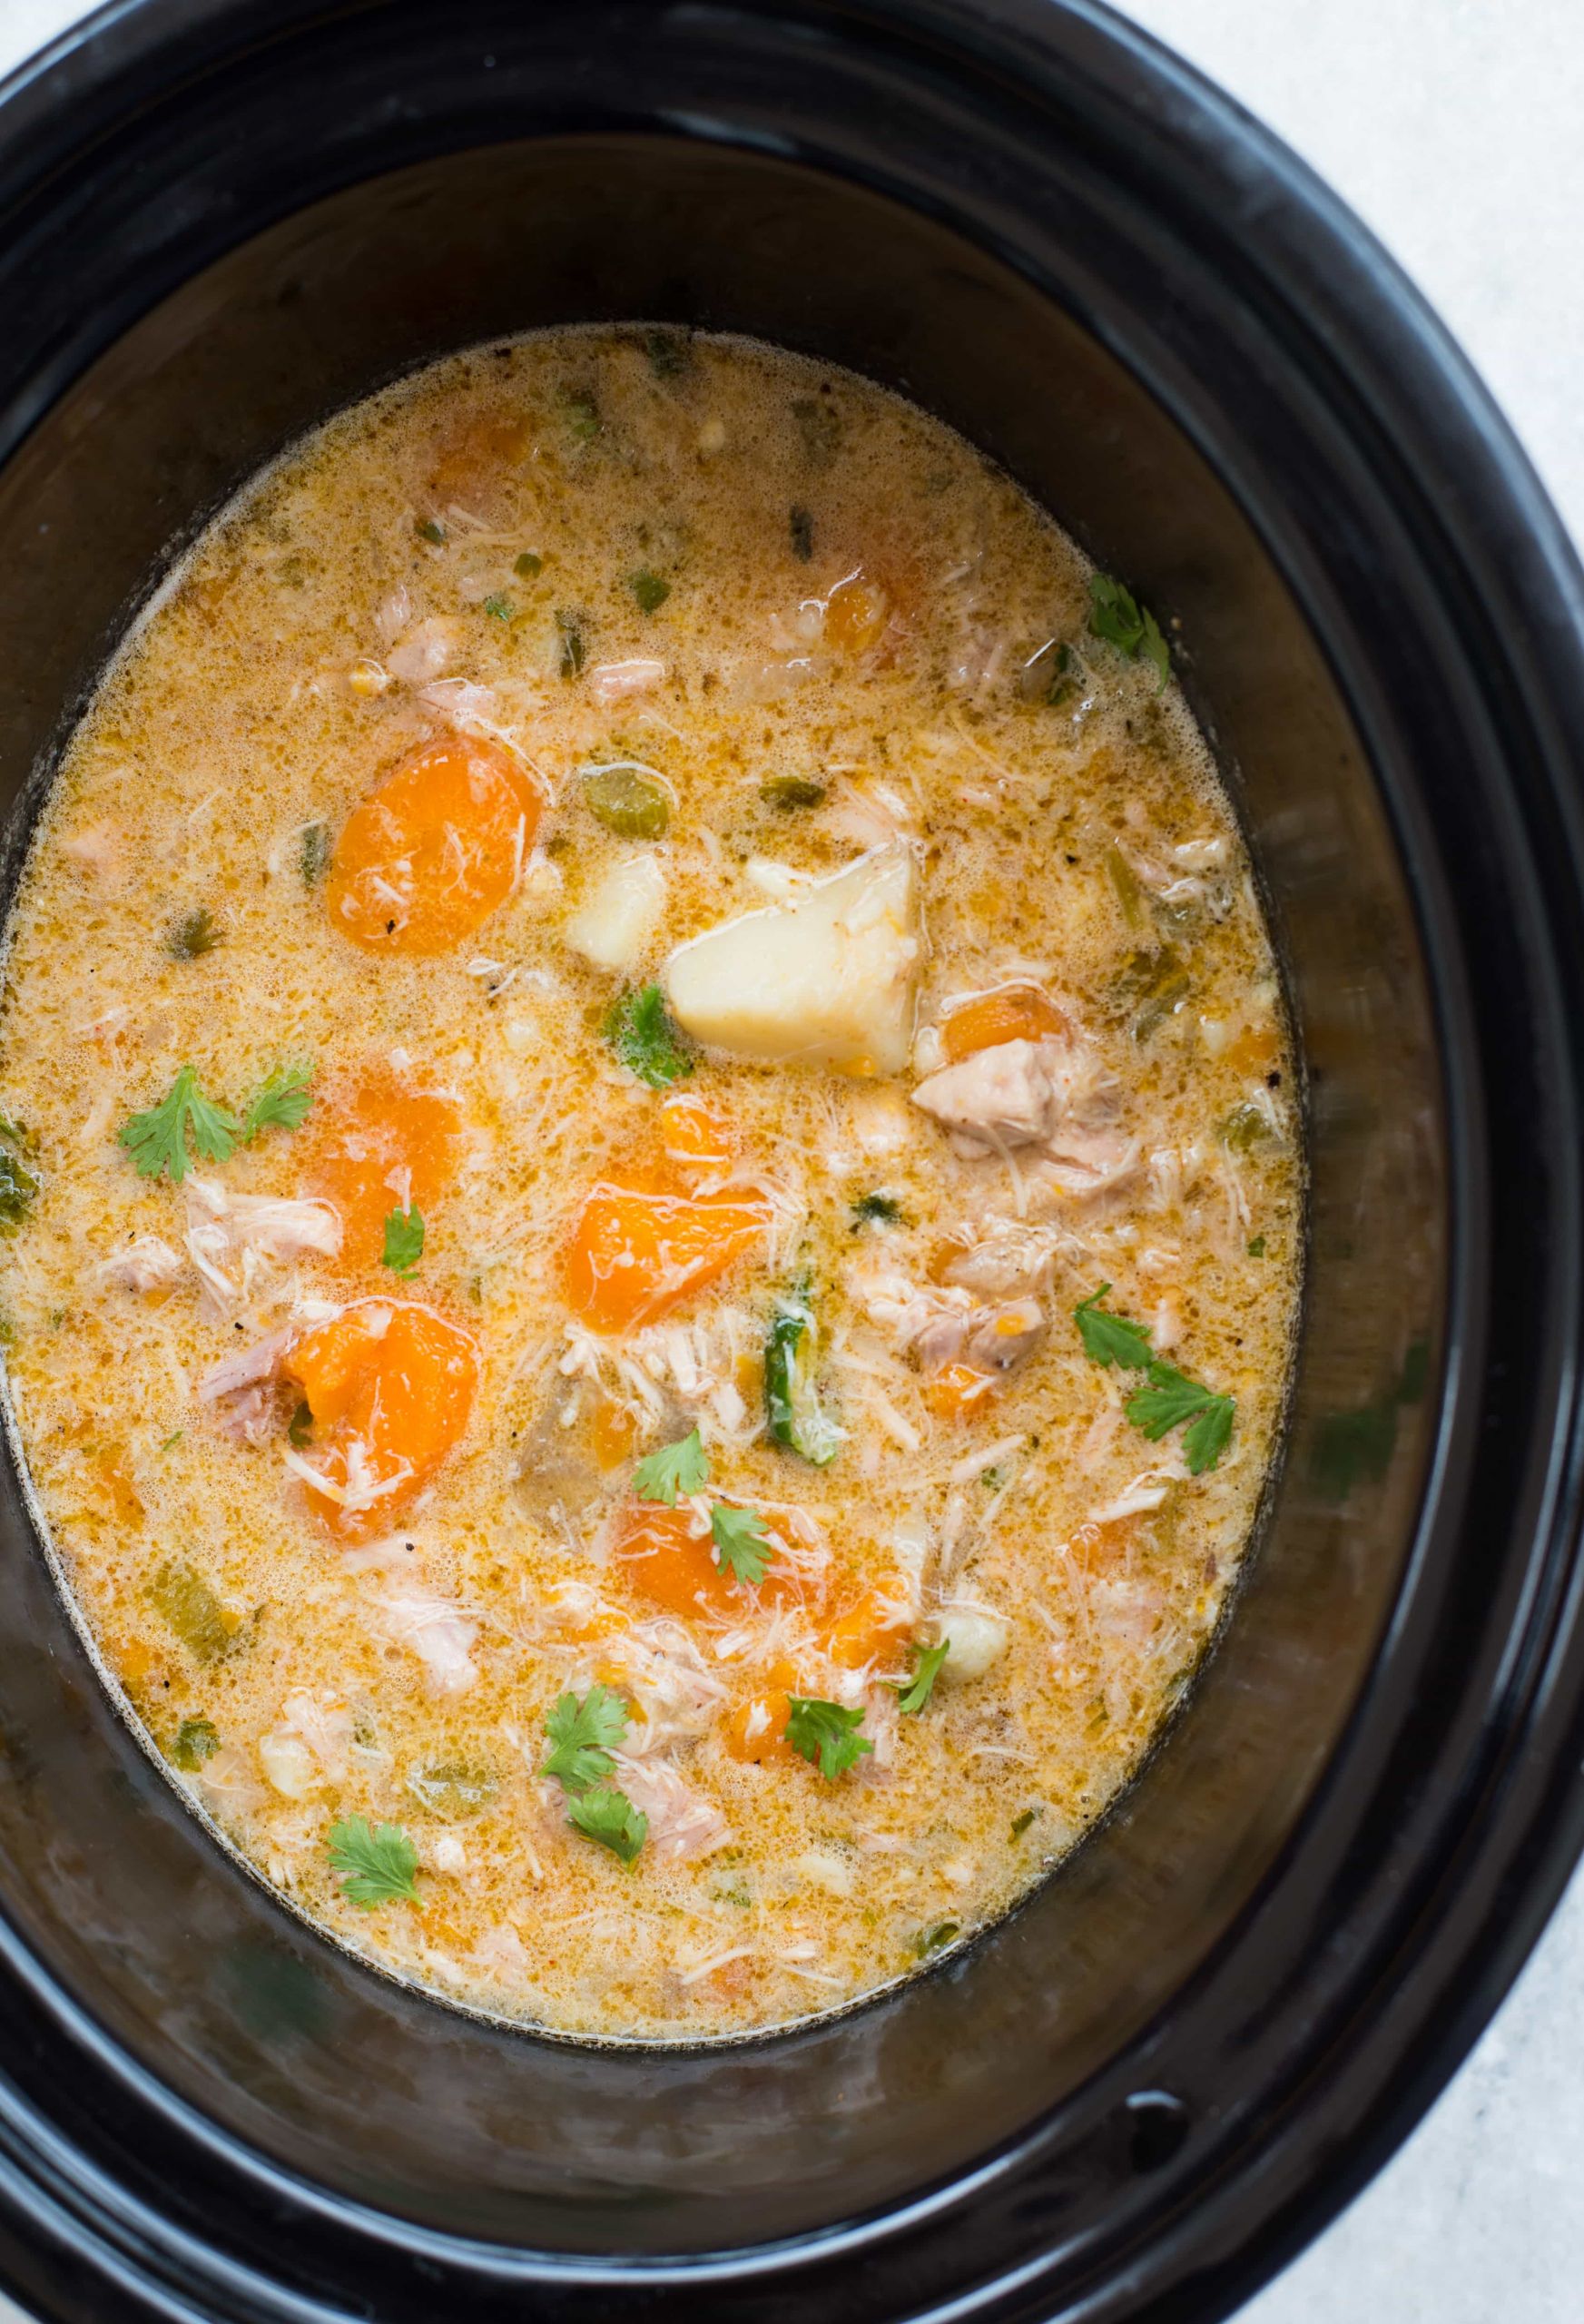 Recipe For Chicken Stew With Vegetables
 SLOW COOKER CHICKEN STEW The flavours of kitchen